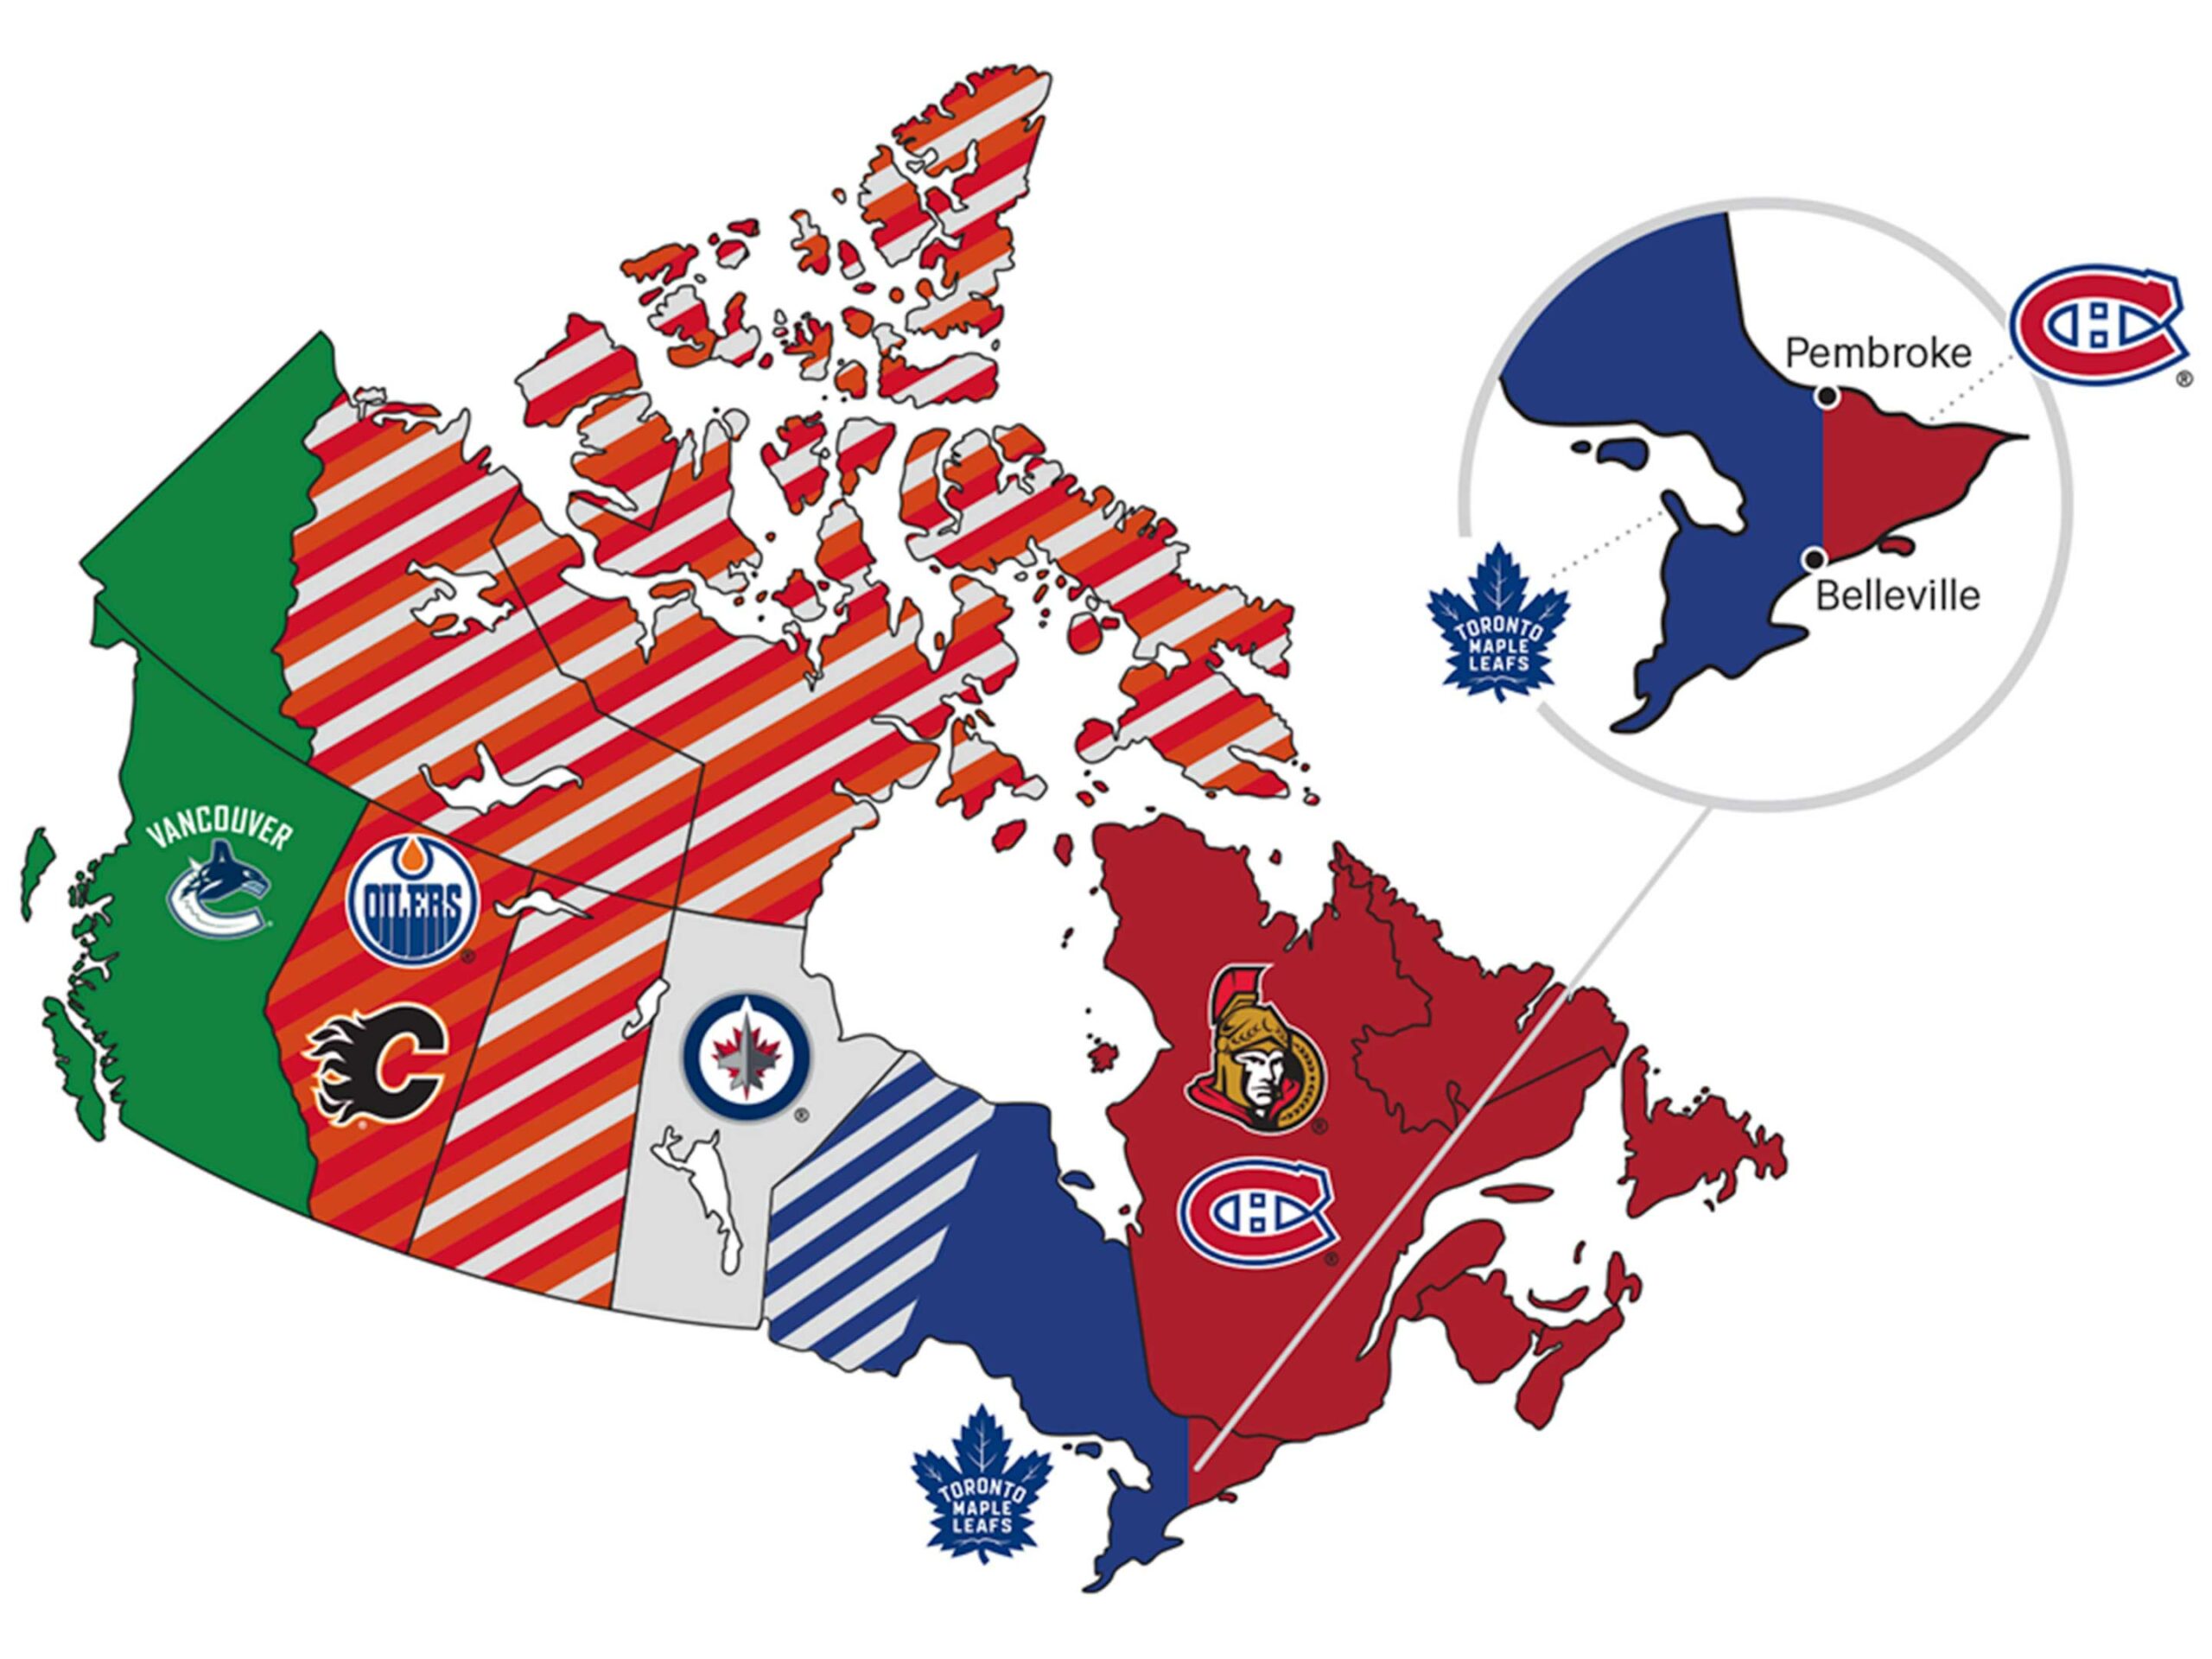 a map of the NHL team regions